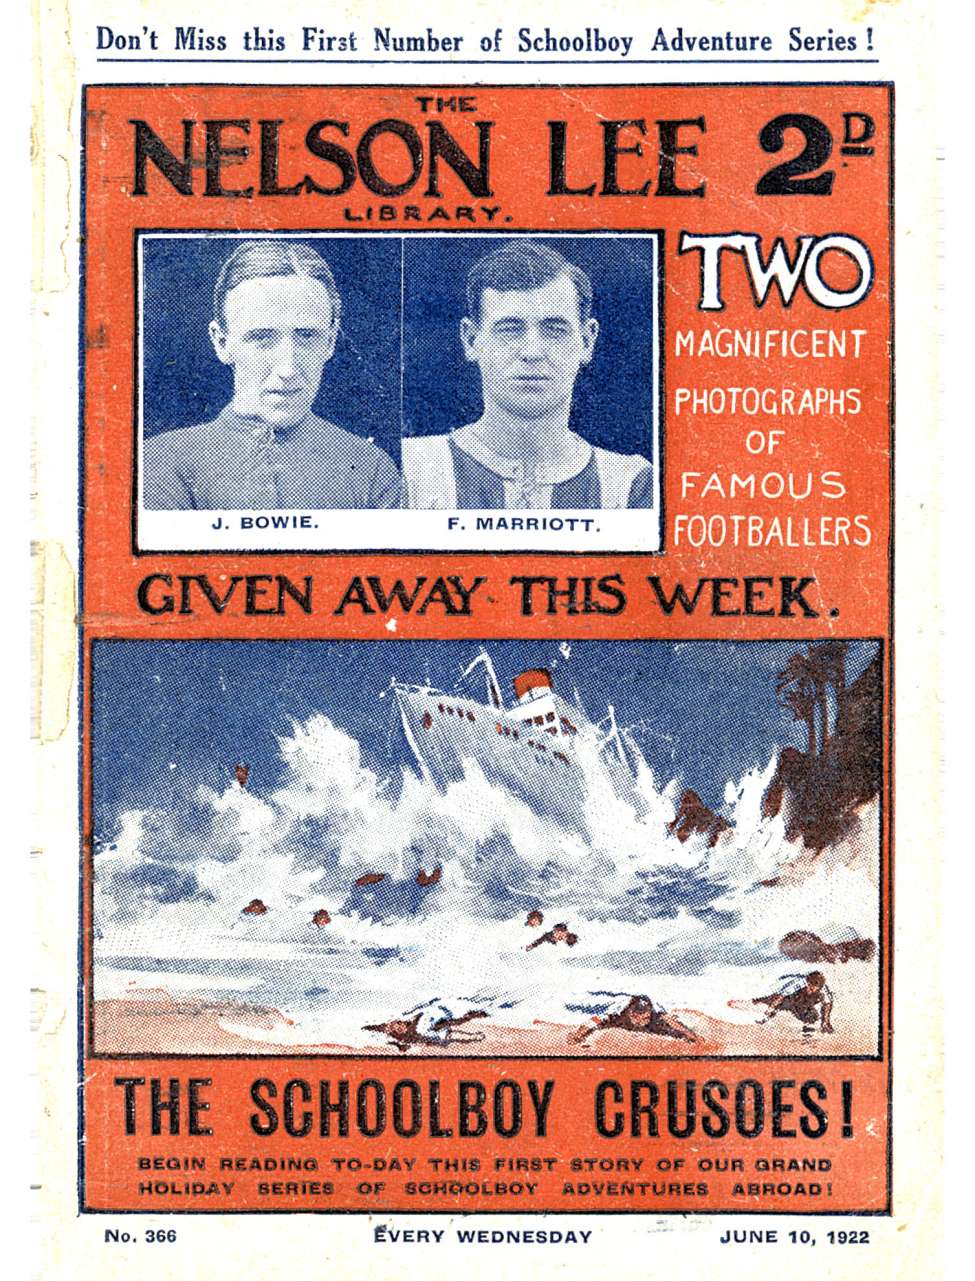 Comic Book Cover For Nelson Lee Library s1 366 - The Schoolboy Crusoes